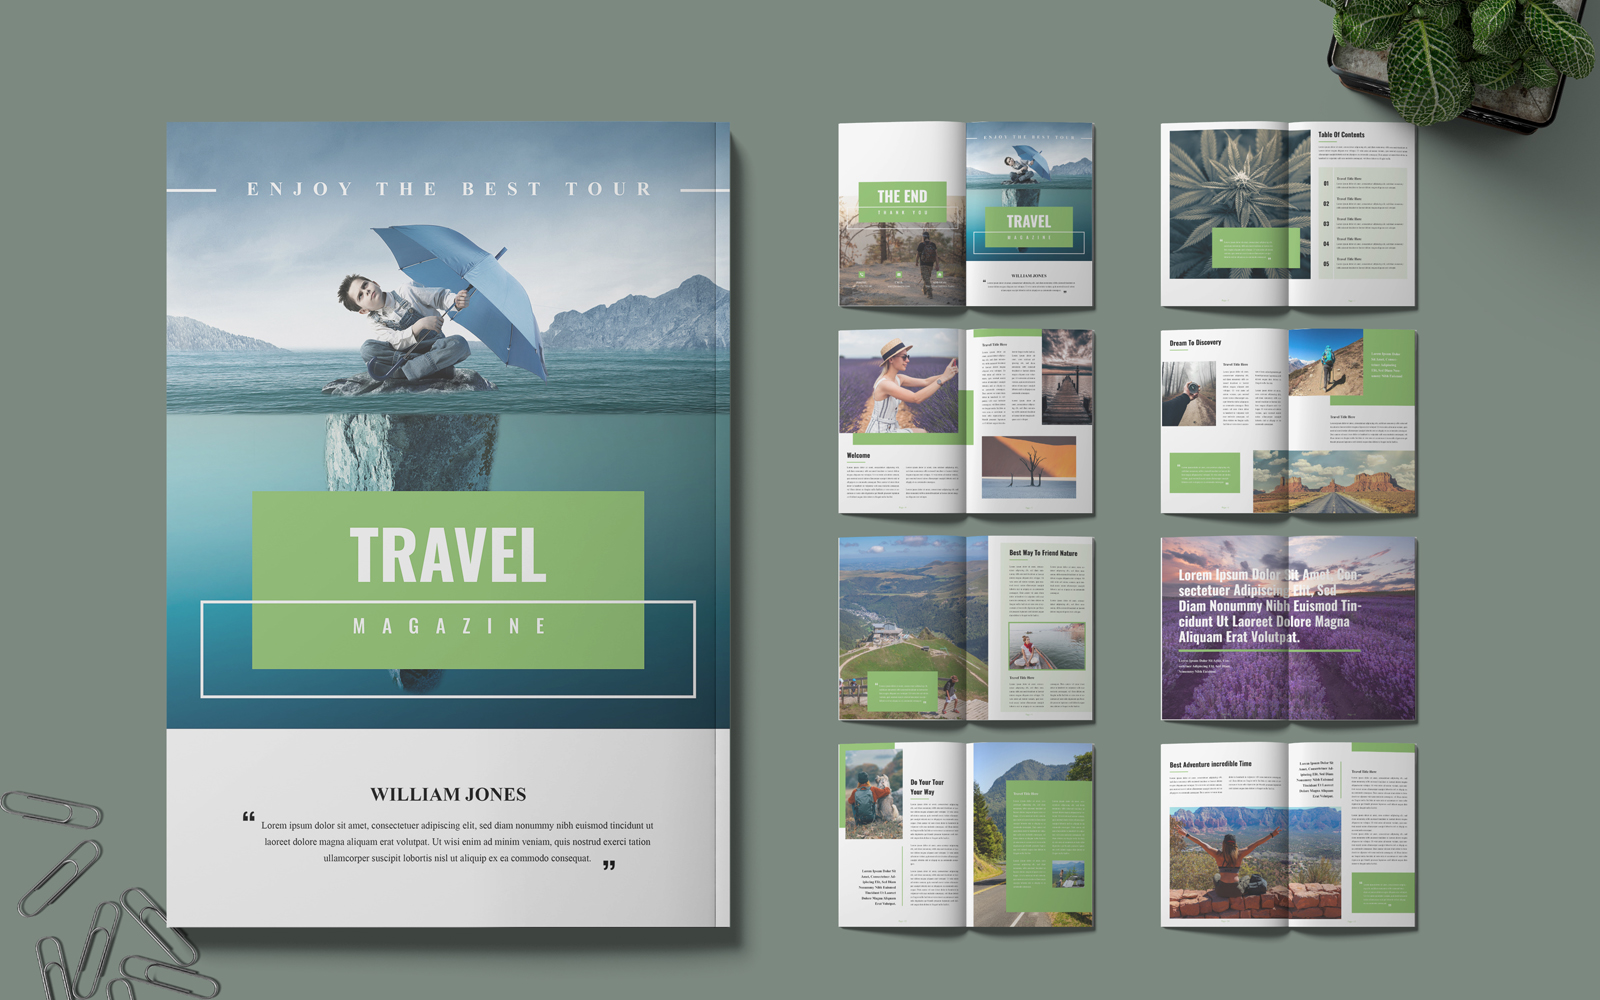 Template #325753 Travel Magazine Webdesign Template - Logo template Preview